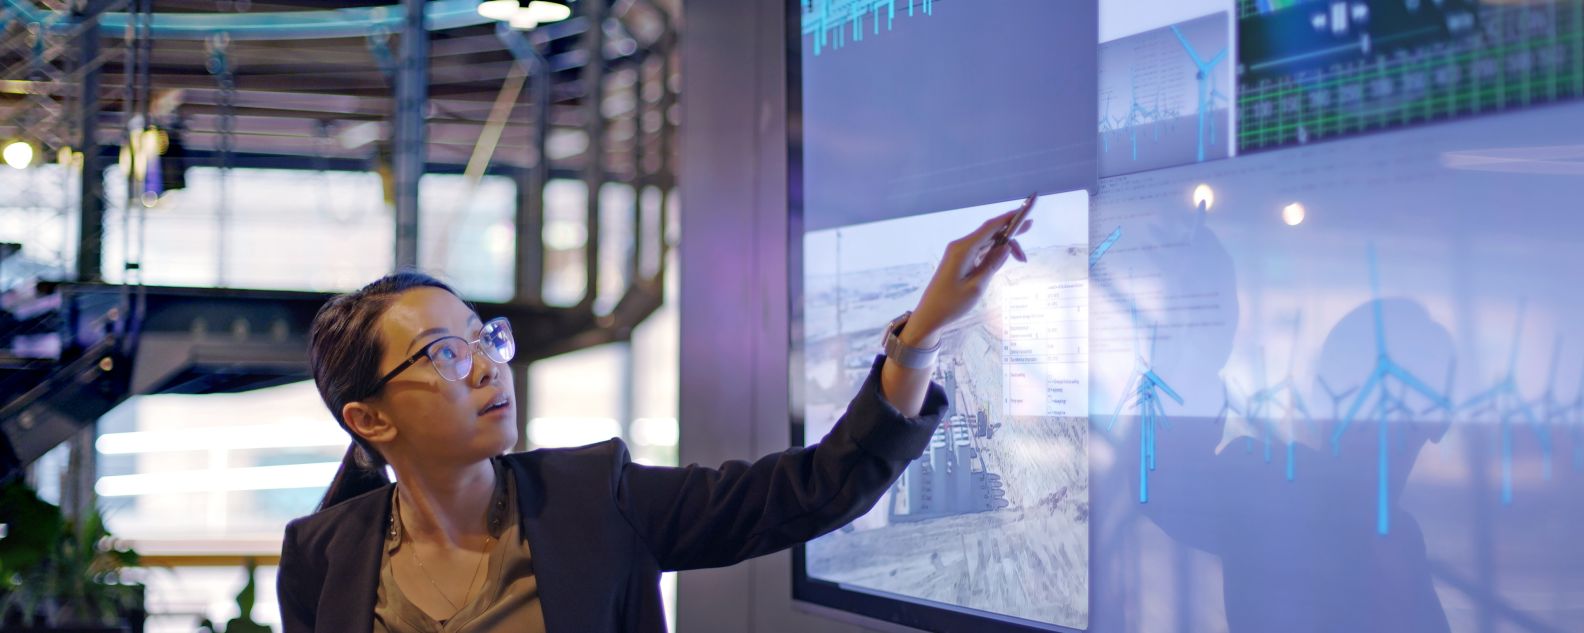 Woman pointing to charts on large screen